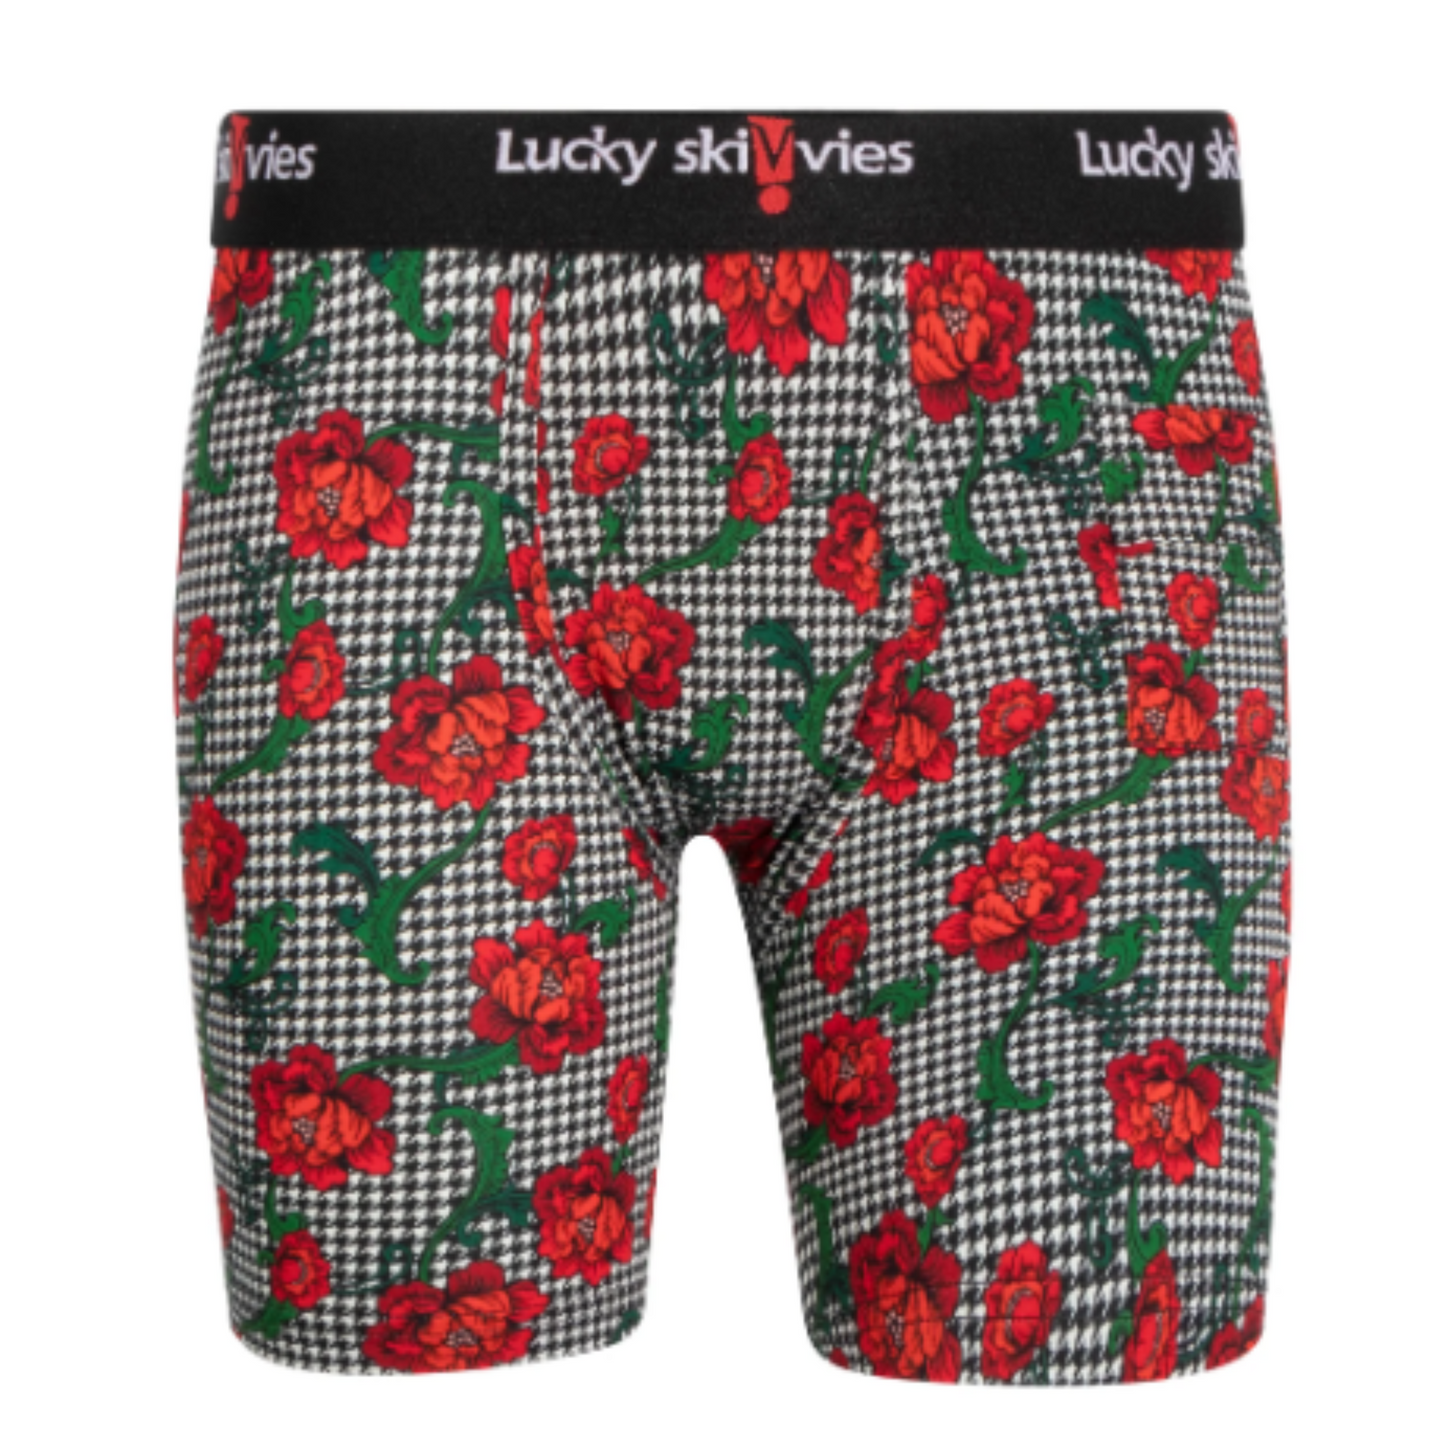 Roses in Harlem Gender Neutral Boxer Briefs by Lucky Skivvies